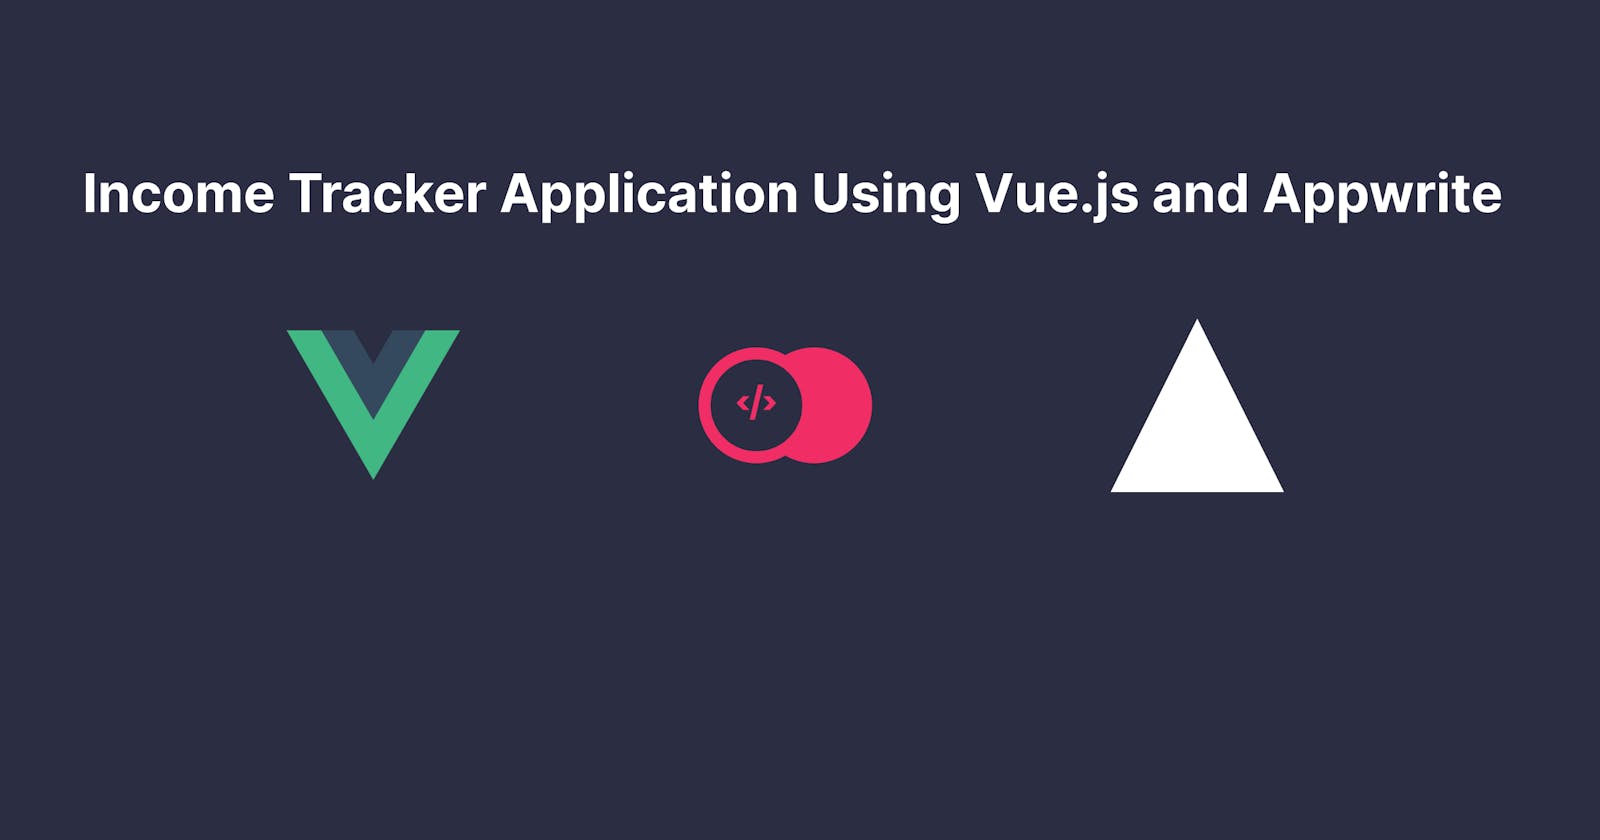 How to Build an Income Tracker Using Vue.js and Appwrite